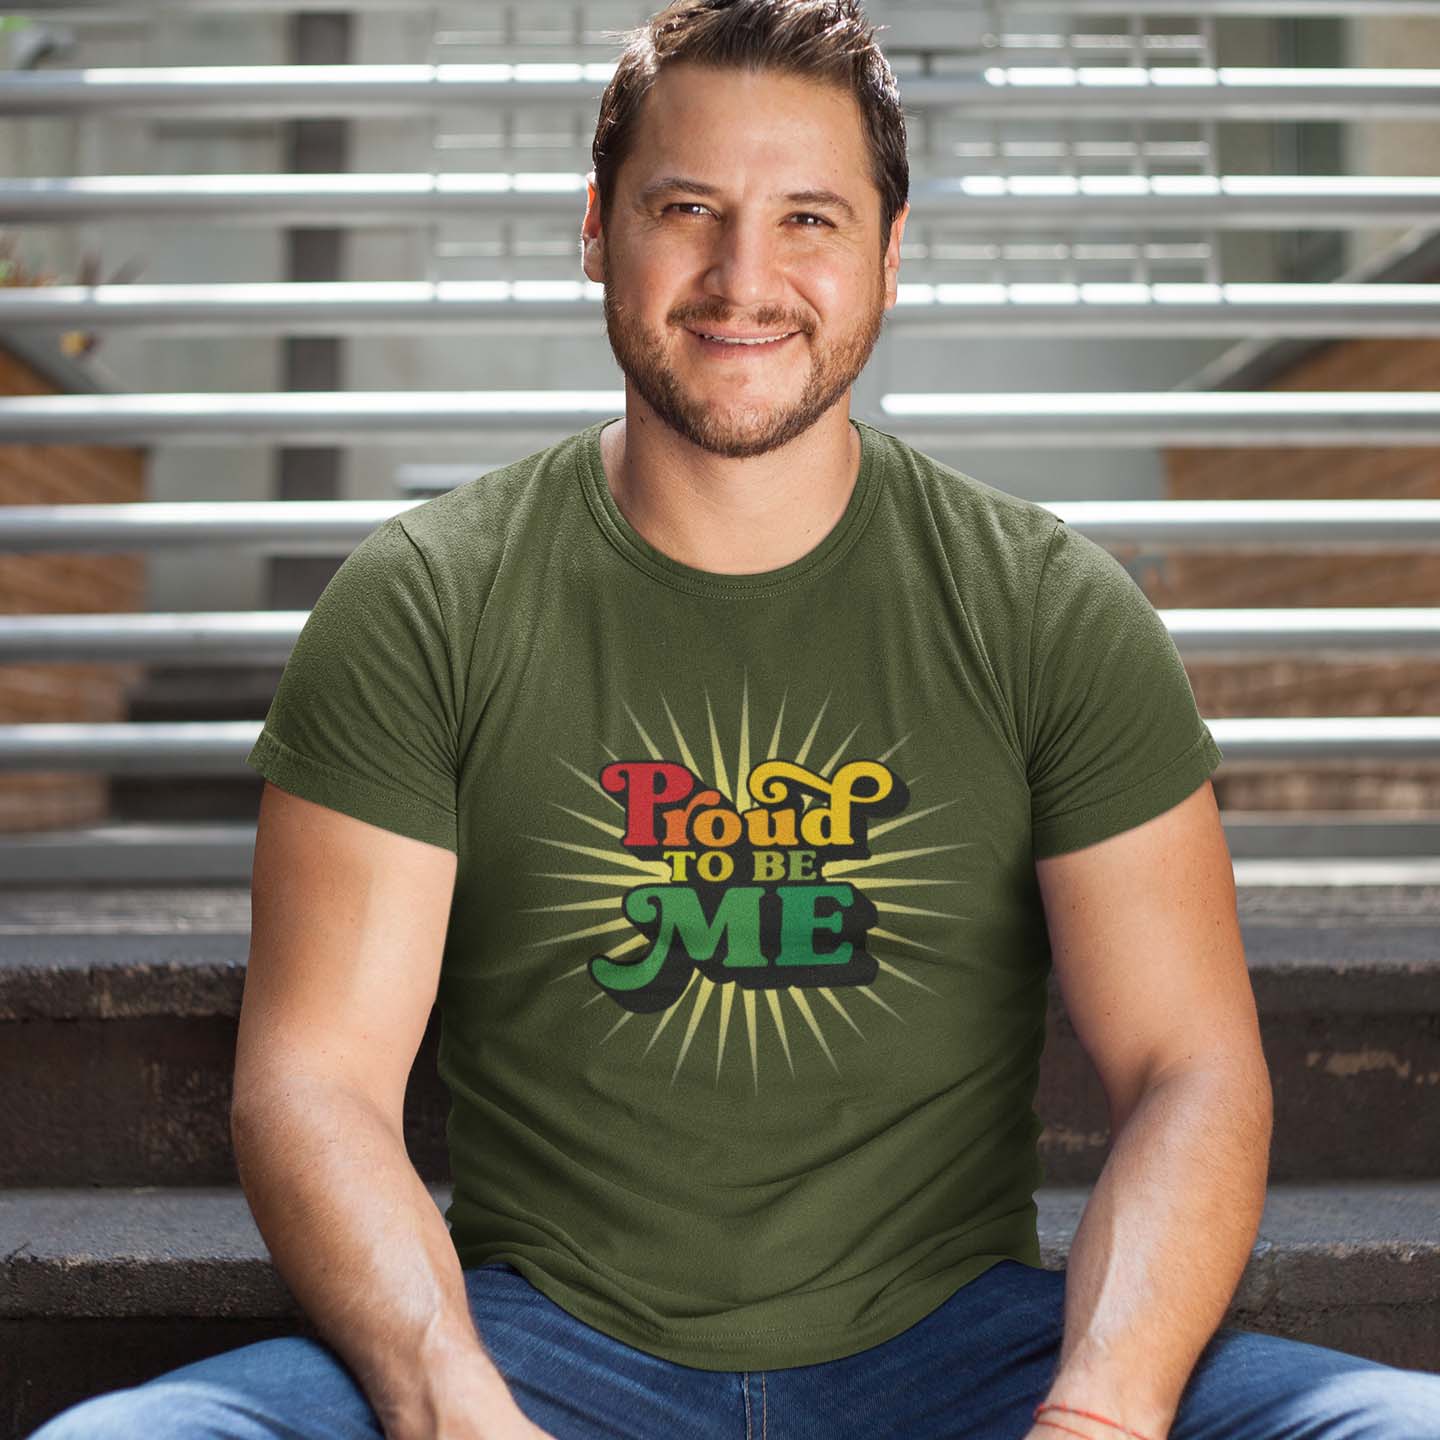 Military green t-shirt for men who are proud of the man you are! This men’s shirt has our PROUD TO BE ME meme printed at the front of the t-shirt and will definitely make people notice you.